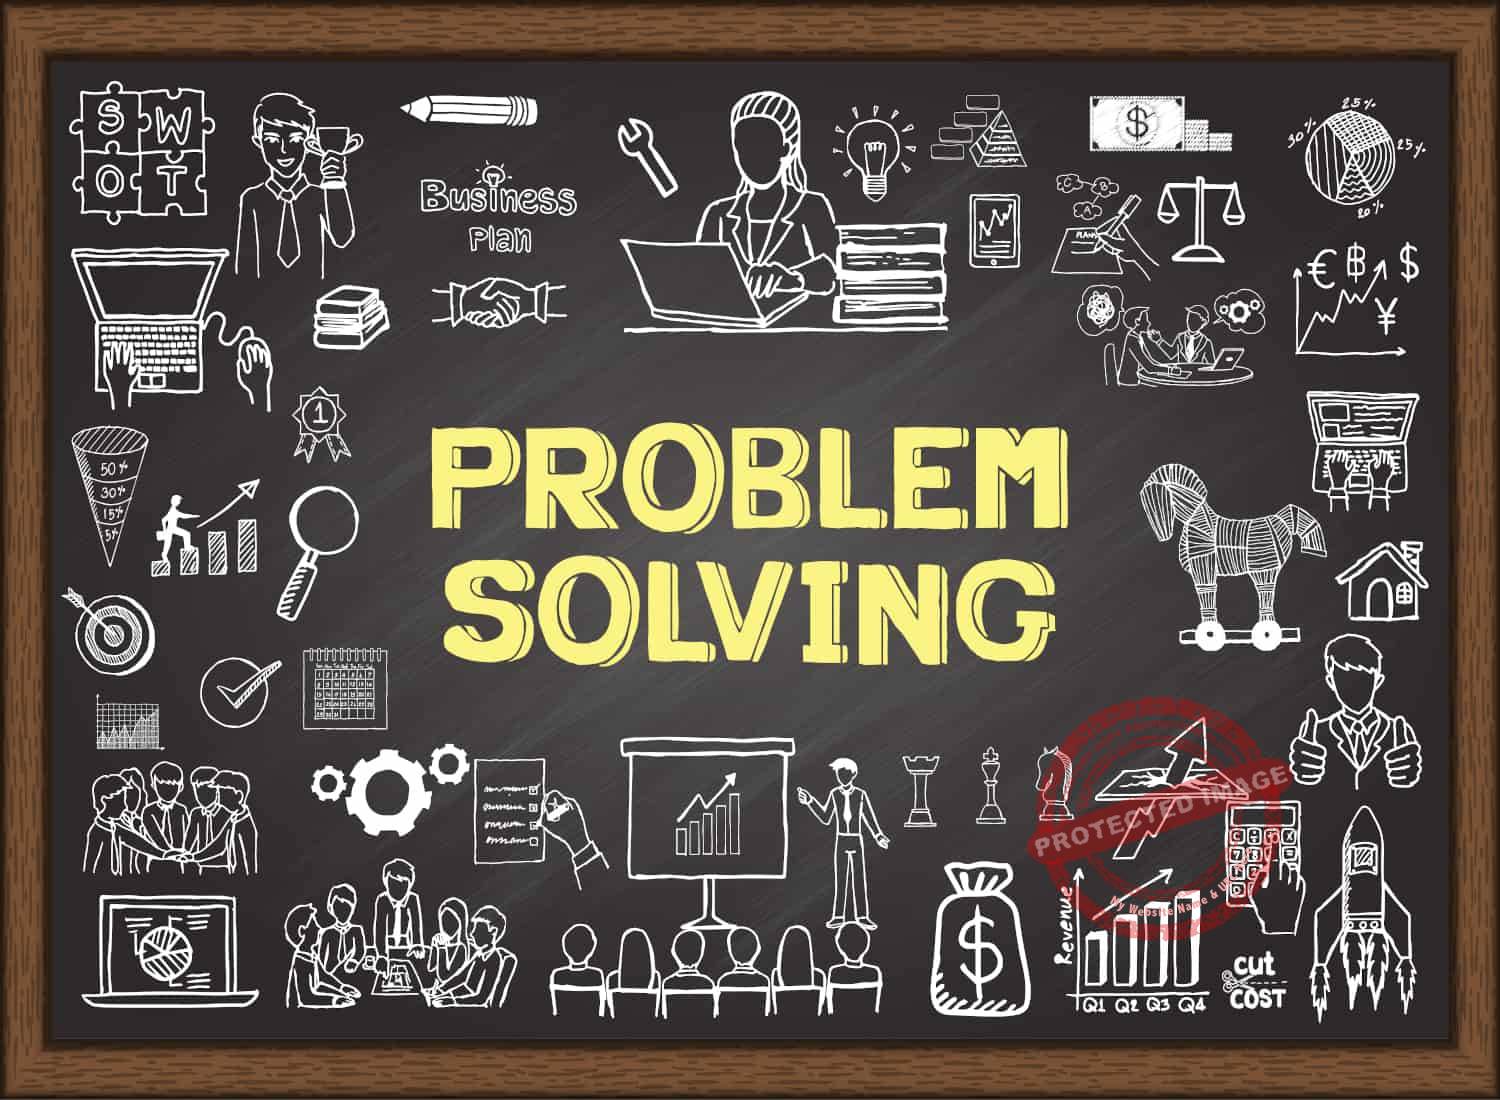 why is problem solving an important life skill